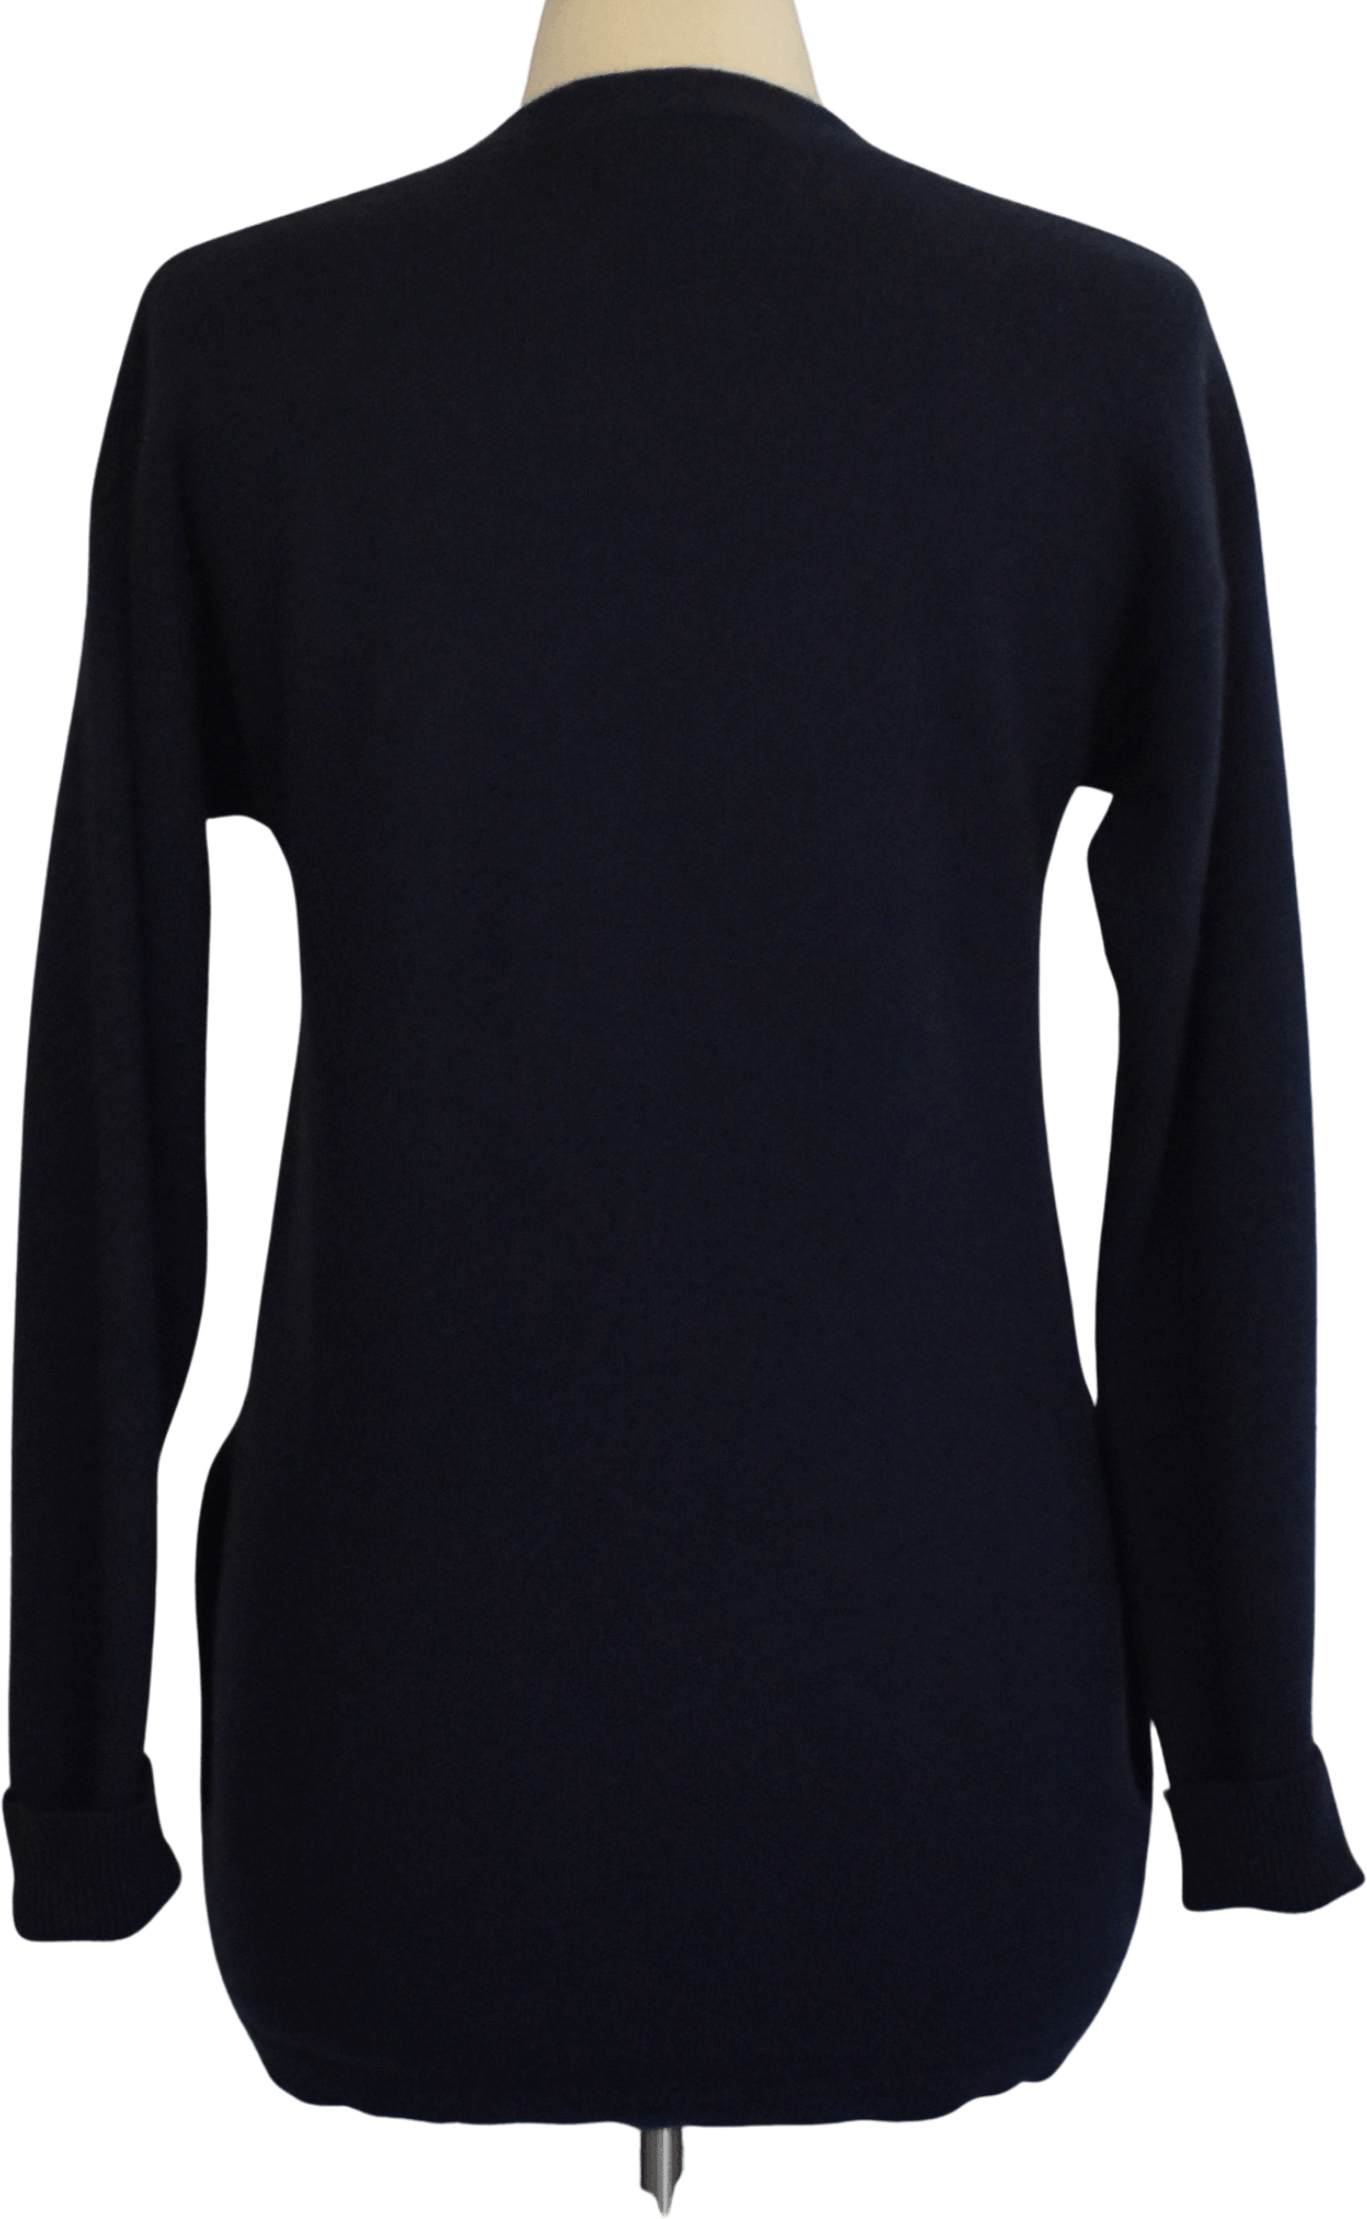 Vintage 80's Navy Blue Cashmere Cardigan Sweater by Scotty Mcgregors ...